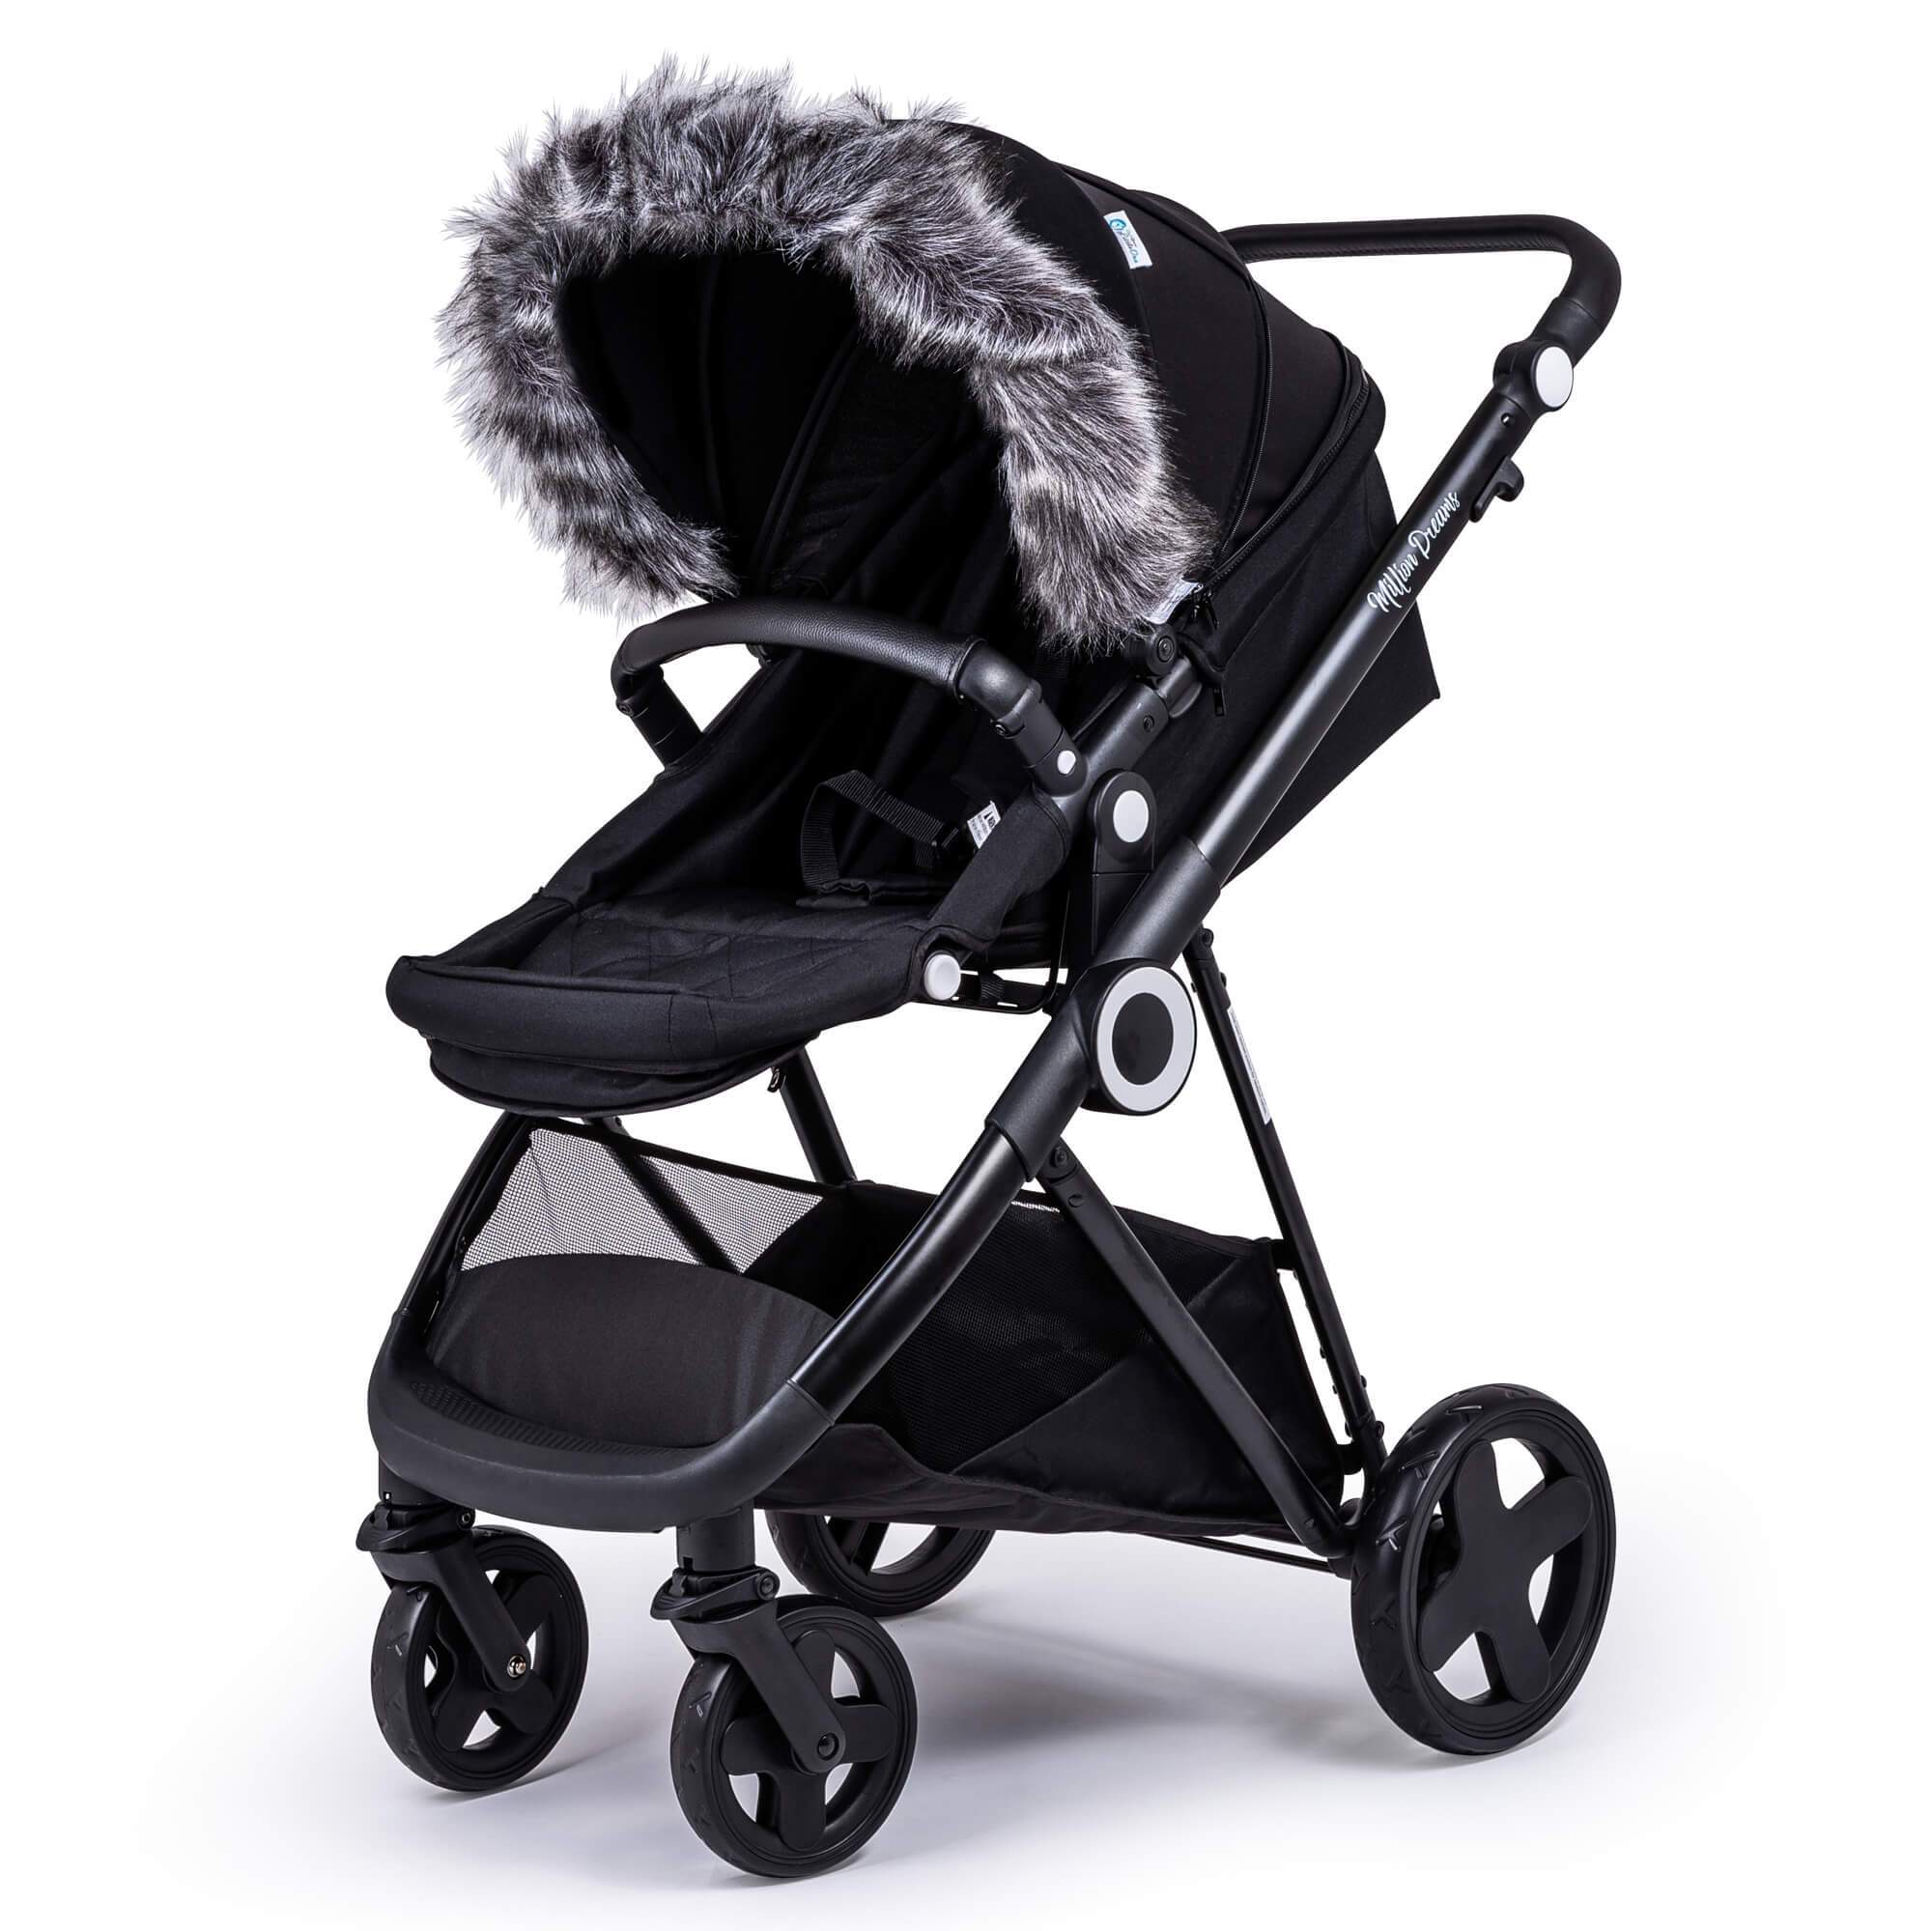 Pram Fur Hood Trim Attachment for Pushchair Compatible with Firstwheels - Dark Grey / Fits All Models | For Your Little One